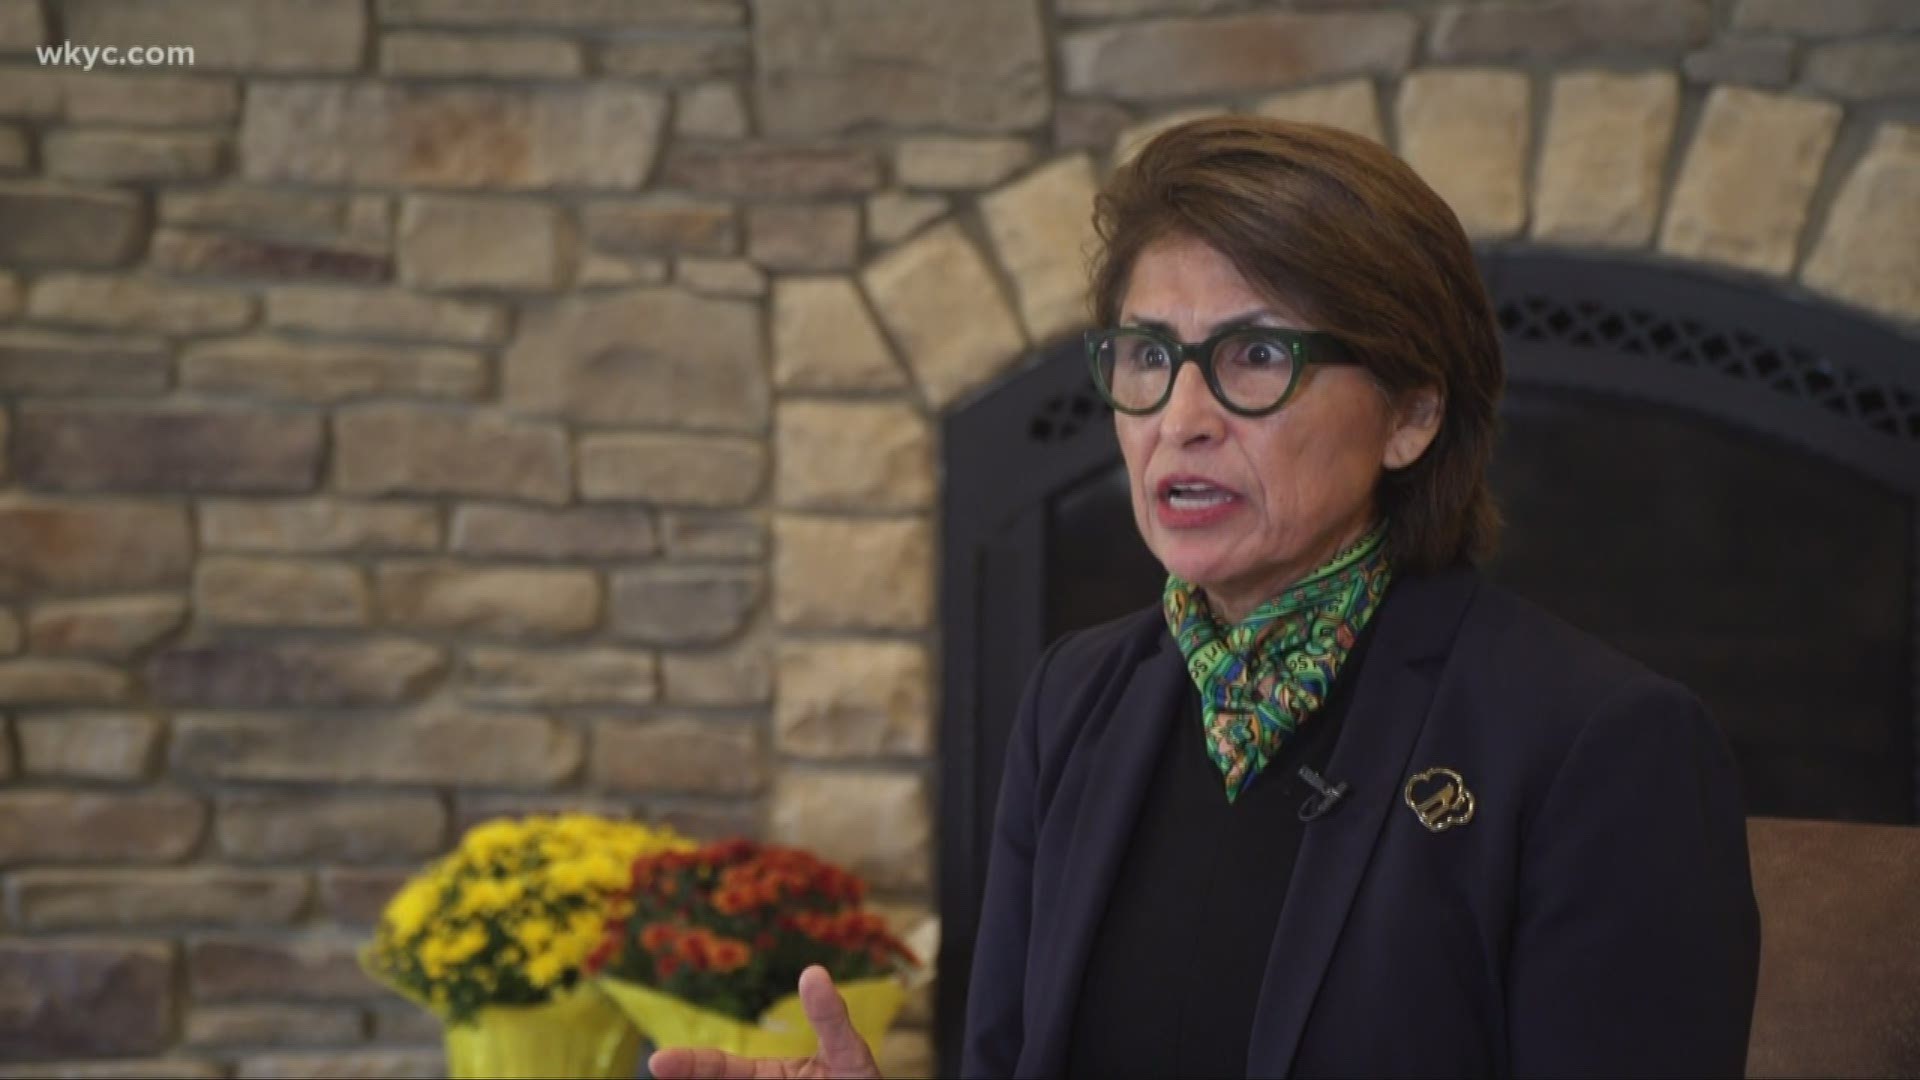 The next generation of girls is being led by Sylvia Acevedo, the CEO of Girl Scout and former NASA engineer. She talks what's next for the organization.